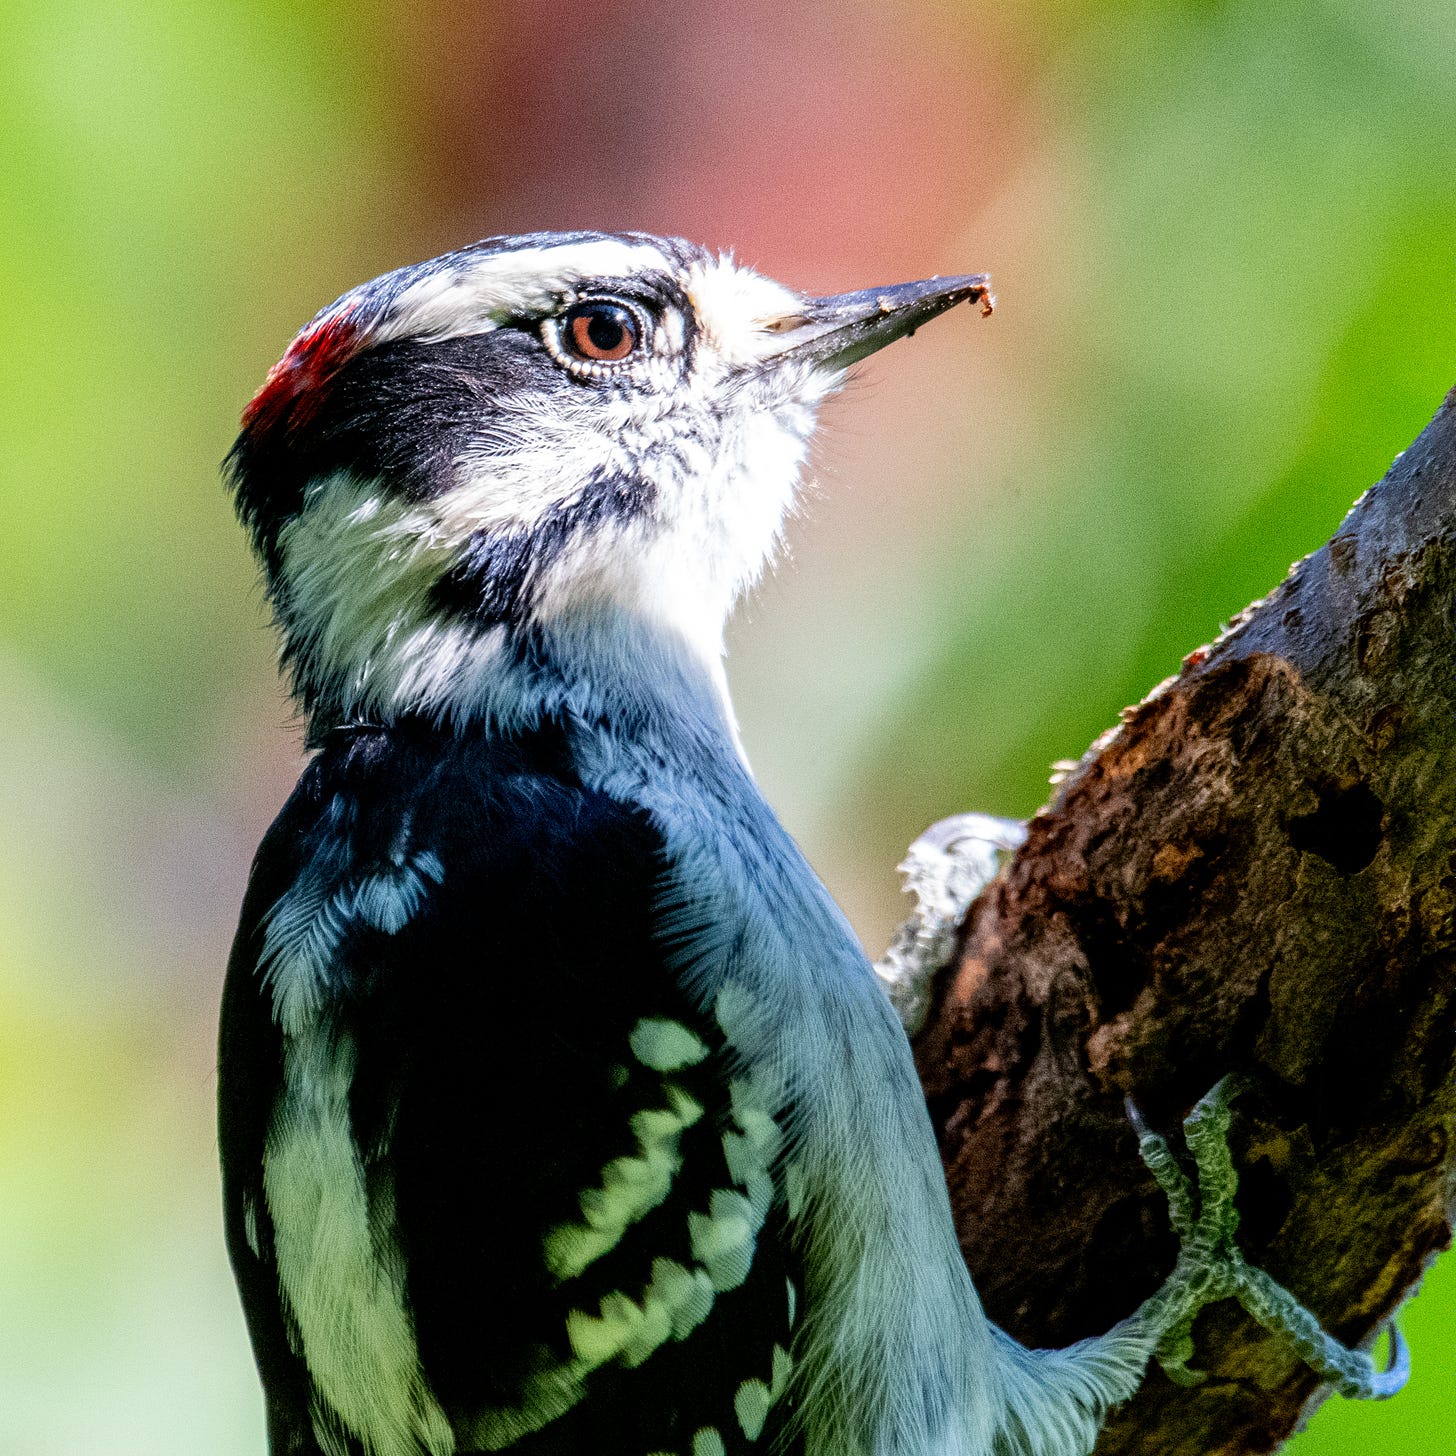 A small black-and-white woodpecker, with a red cap, pokes its head up into the sun